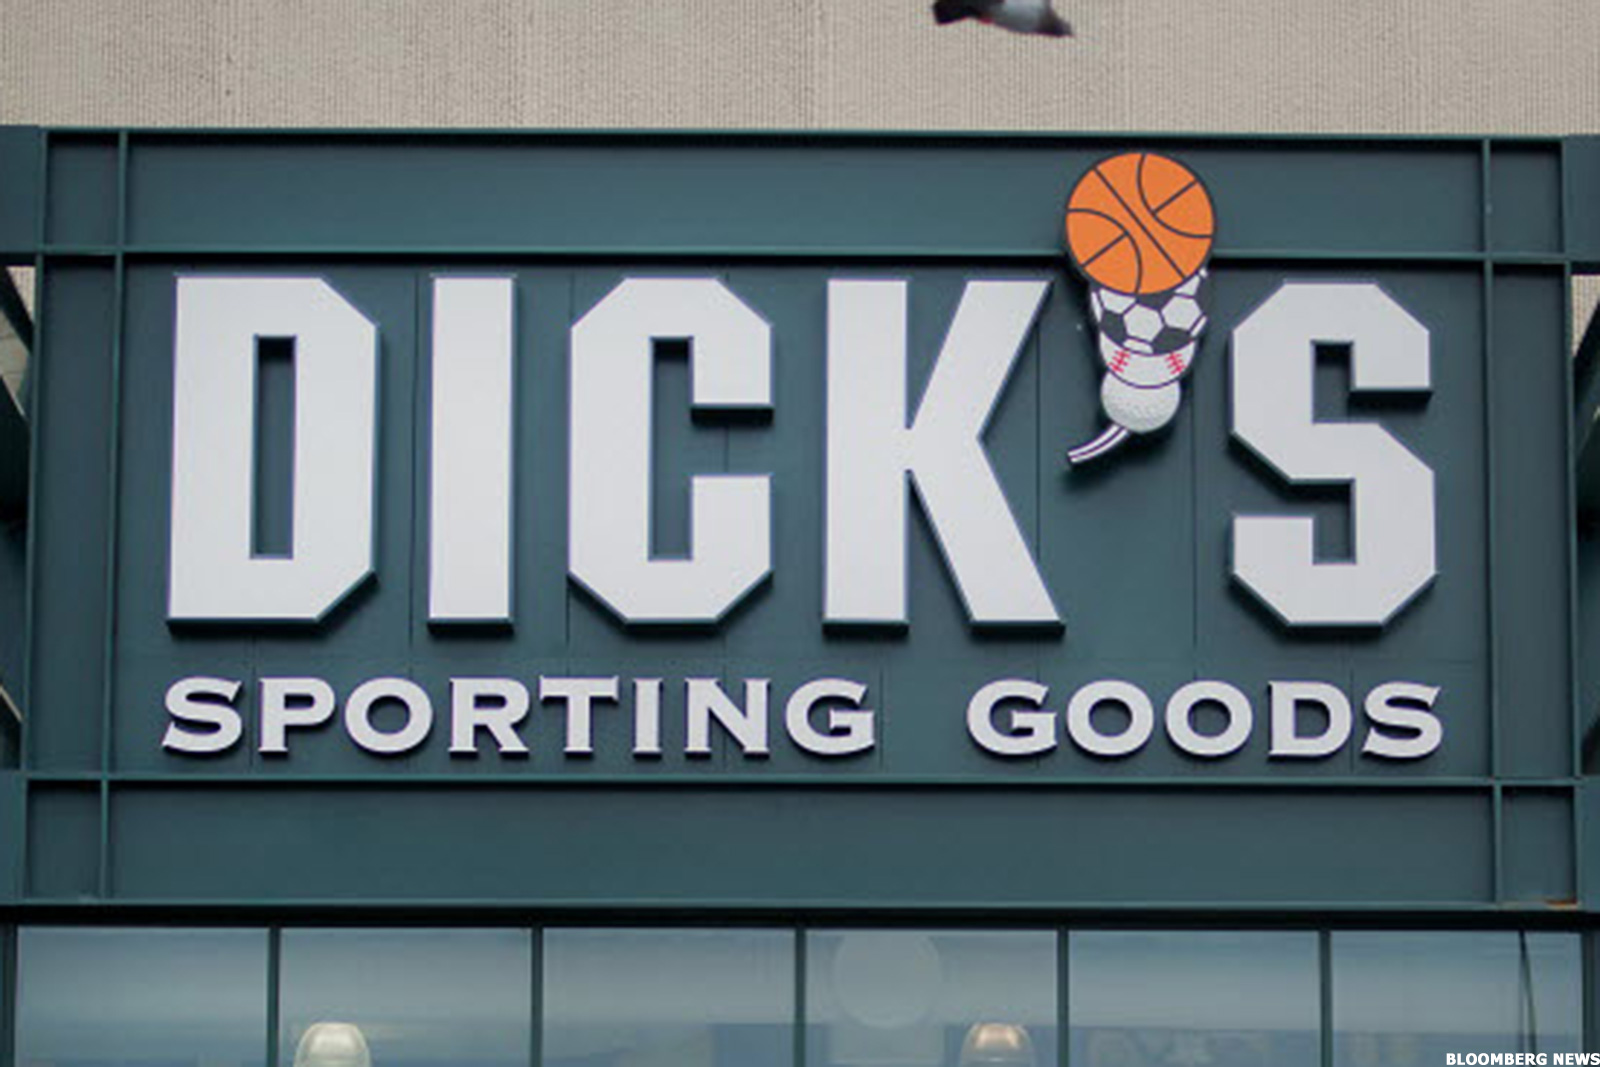 Dick S Sporting Goods Sports A Few Bearish Clues That Give Us Pause Realmoney